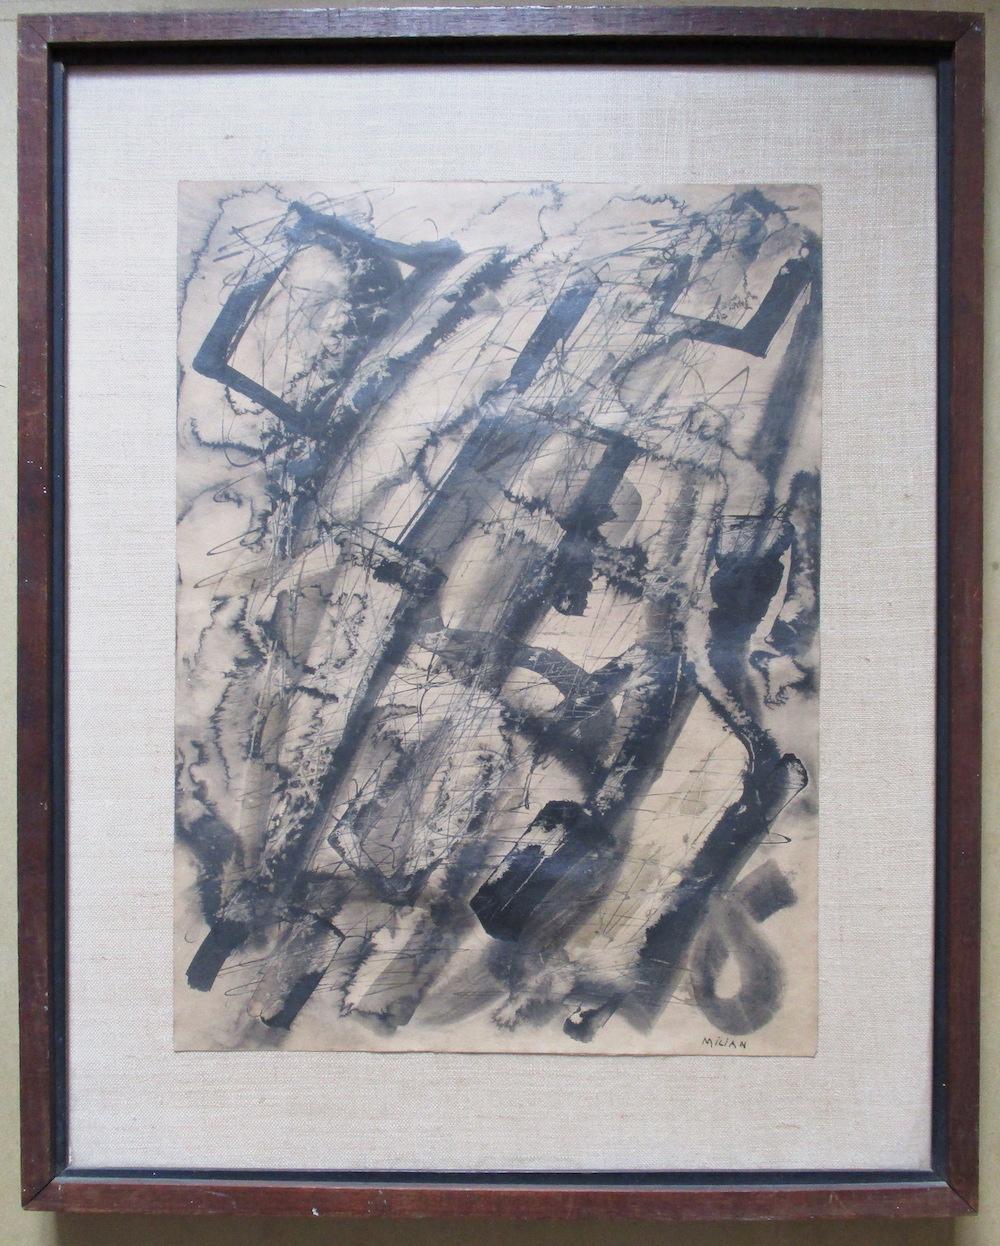 Cuban abstract modernist composition - Abstract Art by Raul Milian